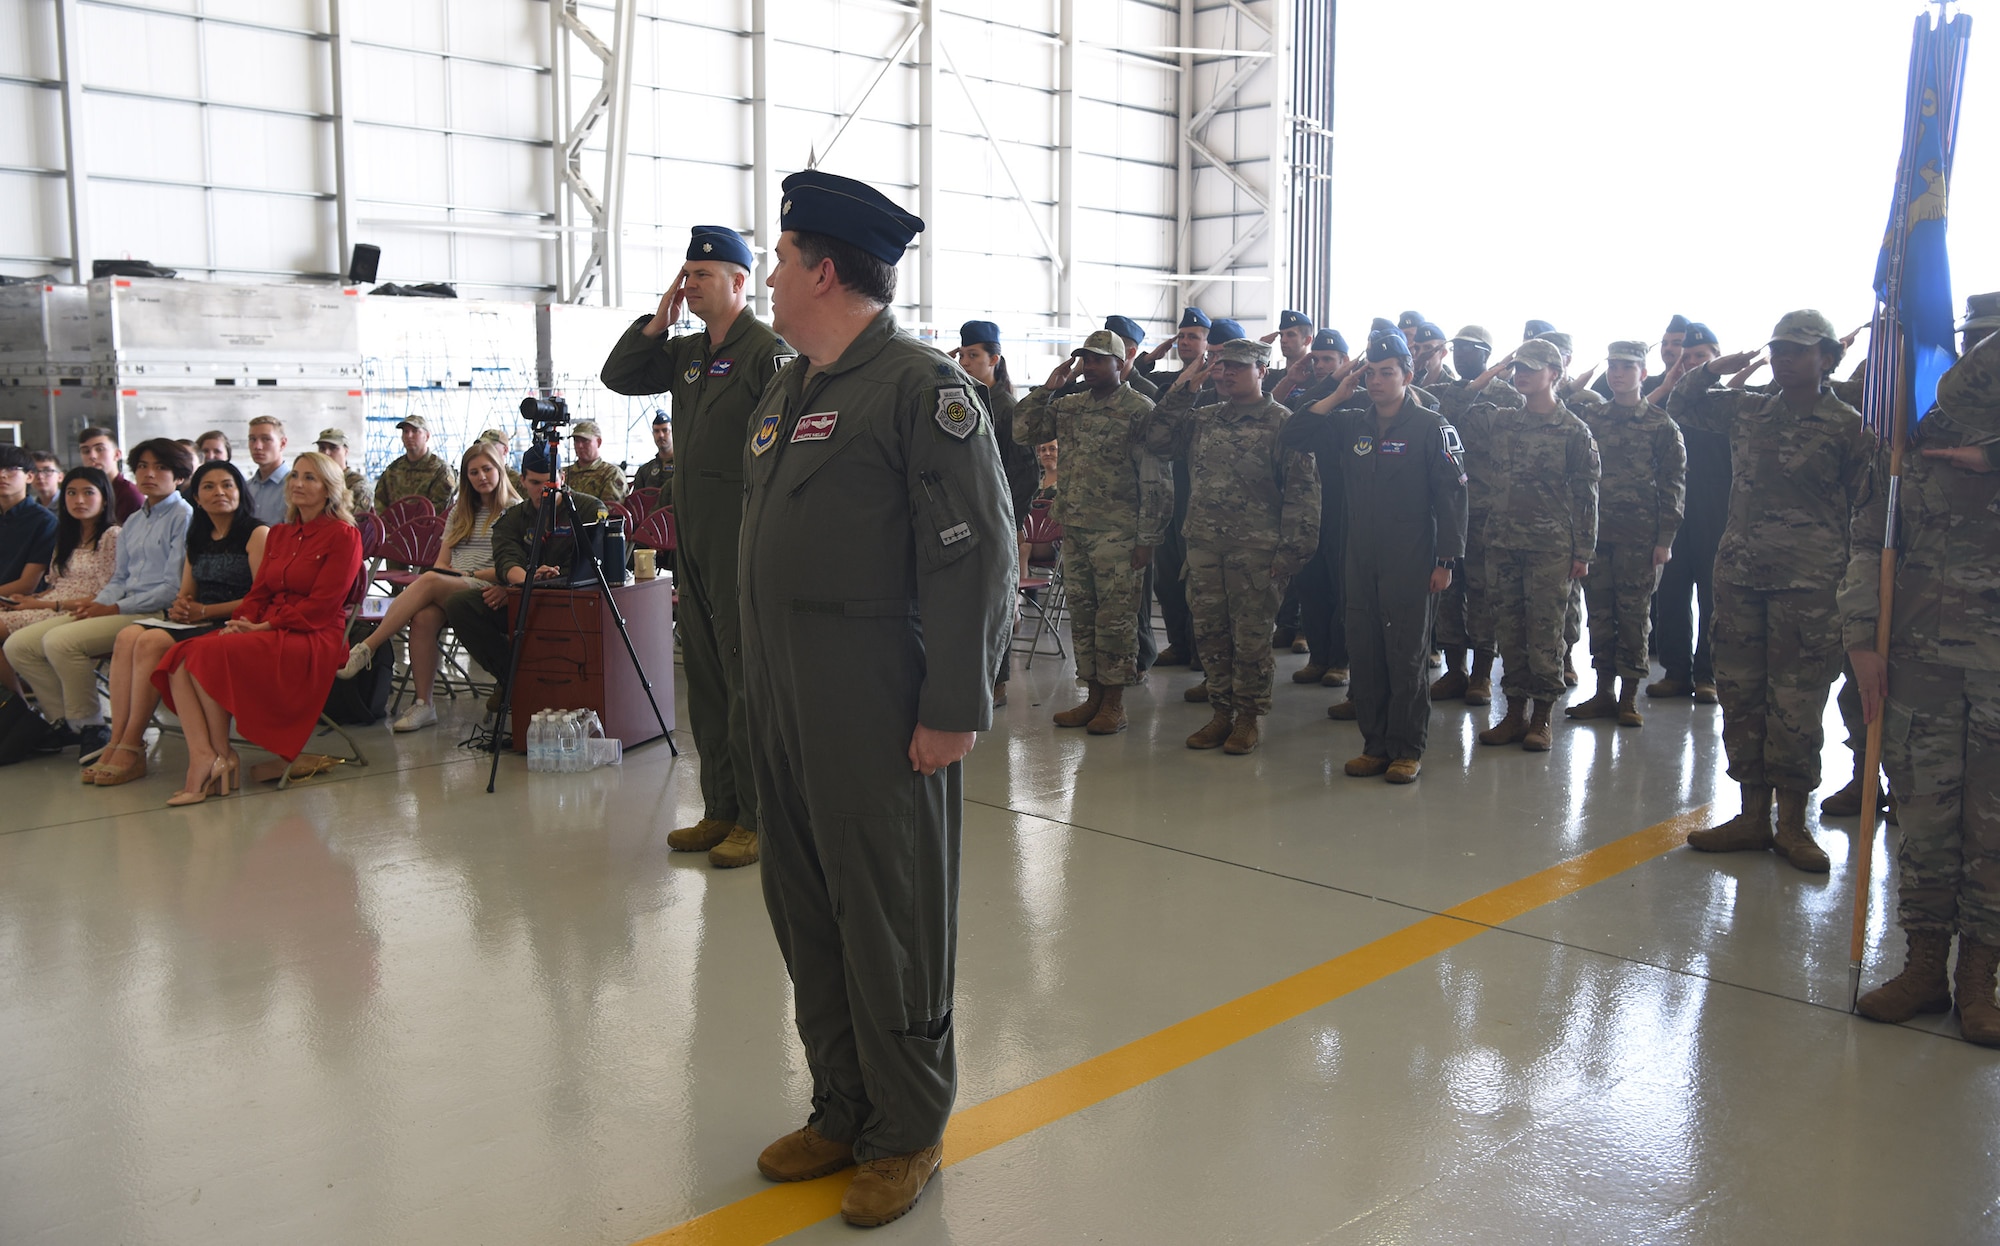 U.S. Air Force Airmen render a first salute to the new 100th Operations Group commander during a change of command ceremony at Royal Air Force Mildenhall, England, June 16, 2022. U.S. Air Force Col. Thomas Hutton, 100th OG commander, Hutton joins the 100th Air Refueling Wing from Ramstein Air Base, Germany, and is a command pilot with more than 3,000 flying hours in tanker and trainer aircraft. (U.S. Air Force photo by Karen Abeyasekere)